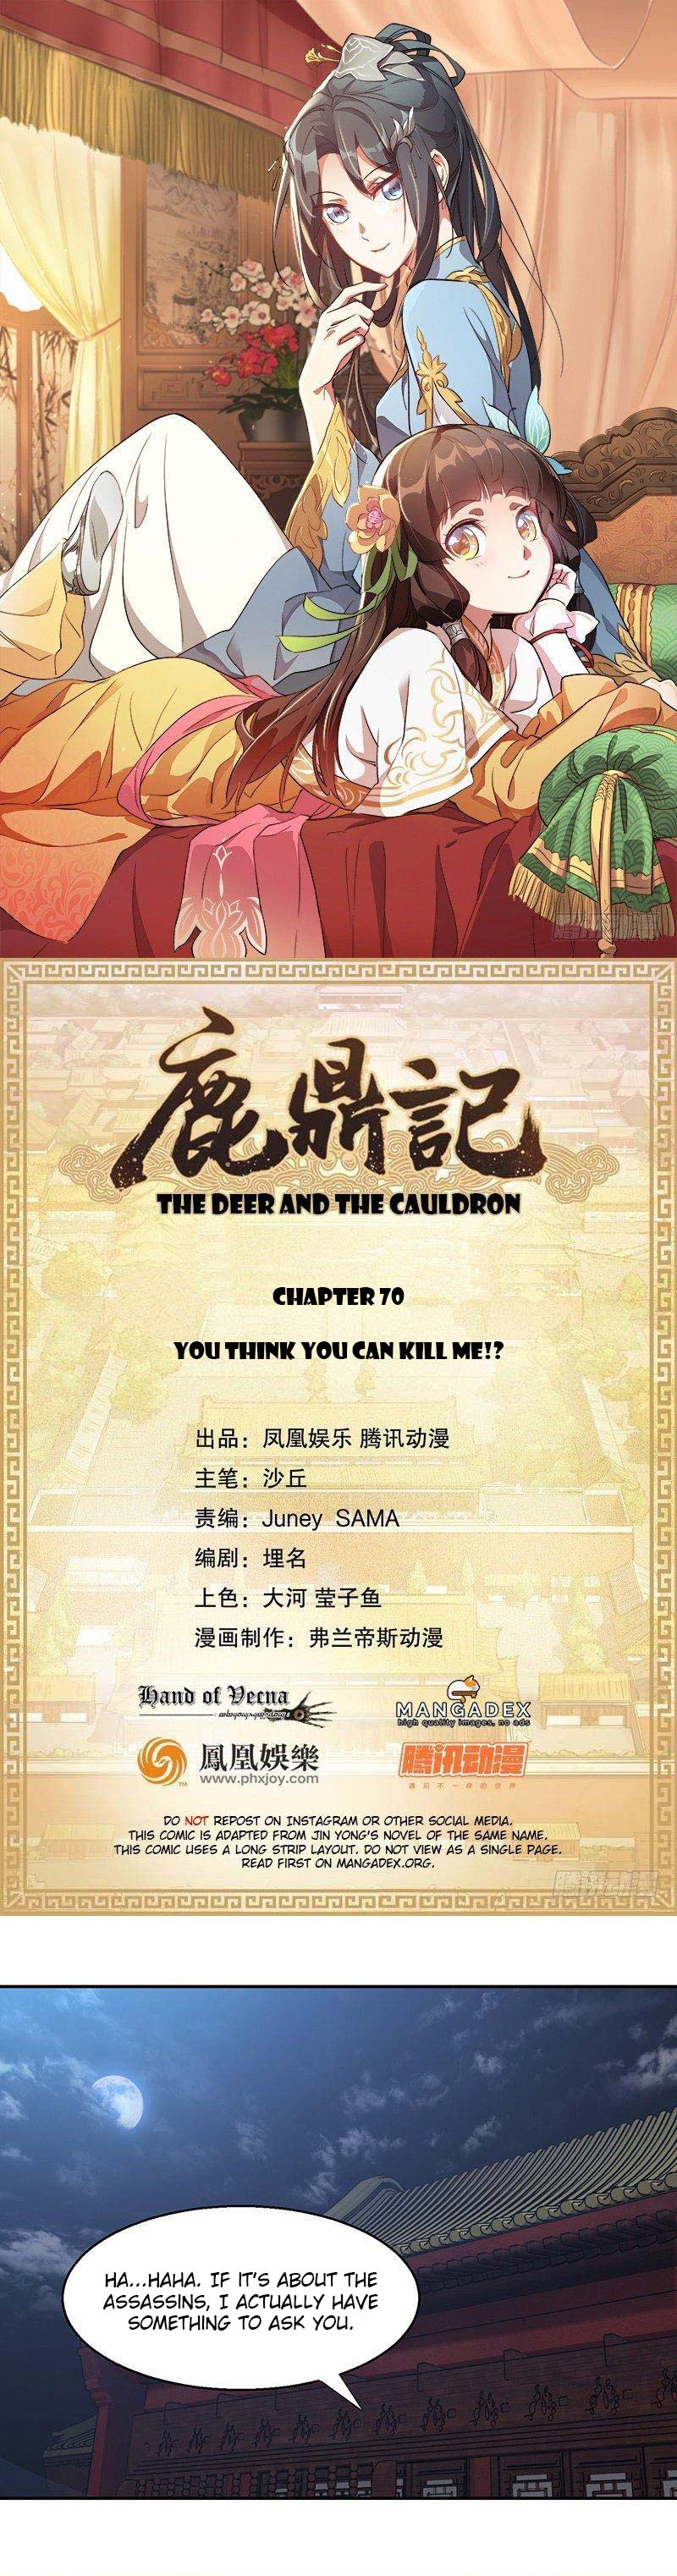 The Deer And The Cauldron Chapter 70 #1